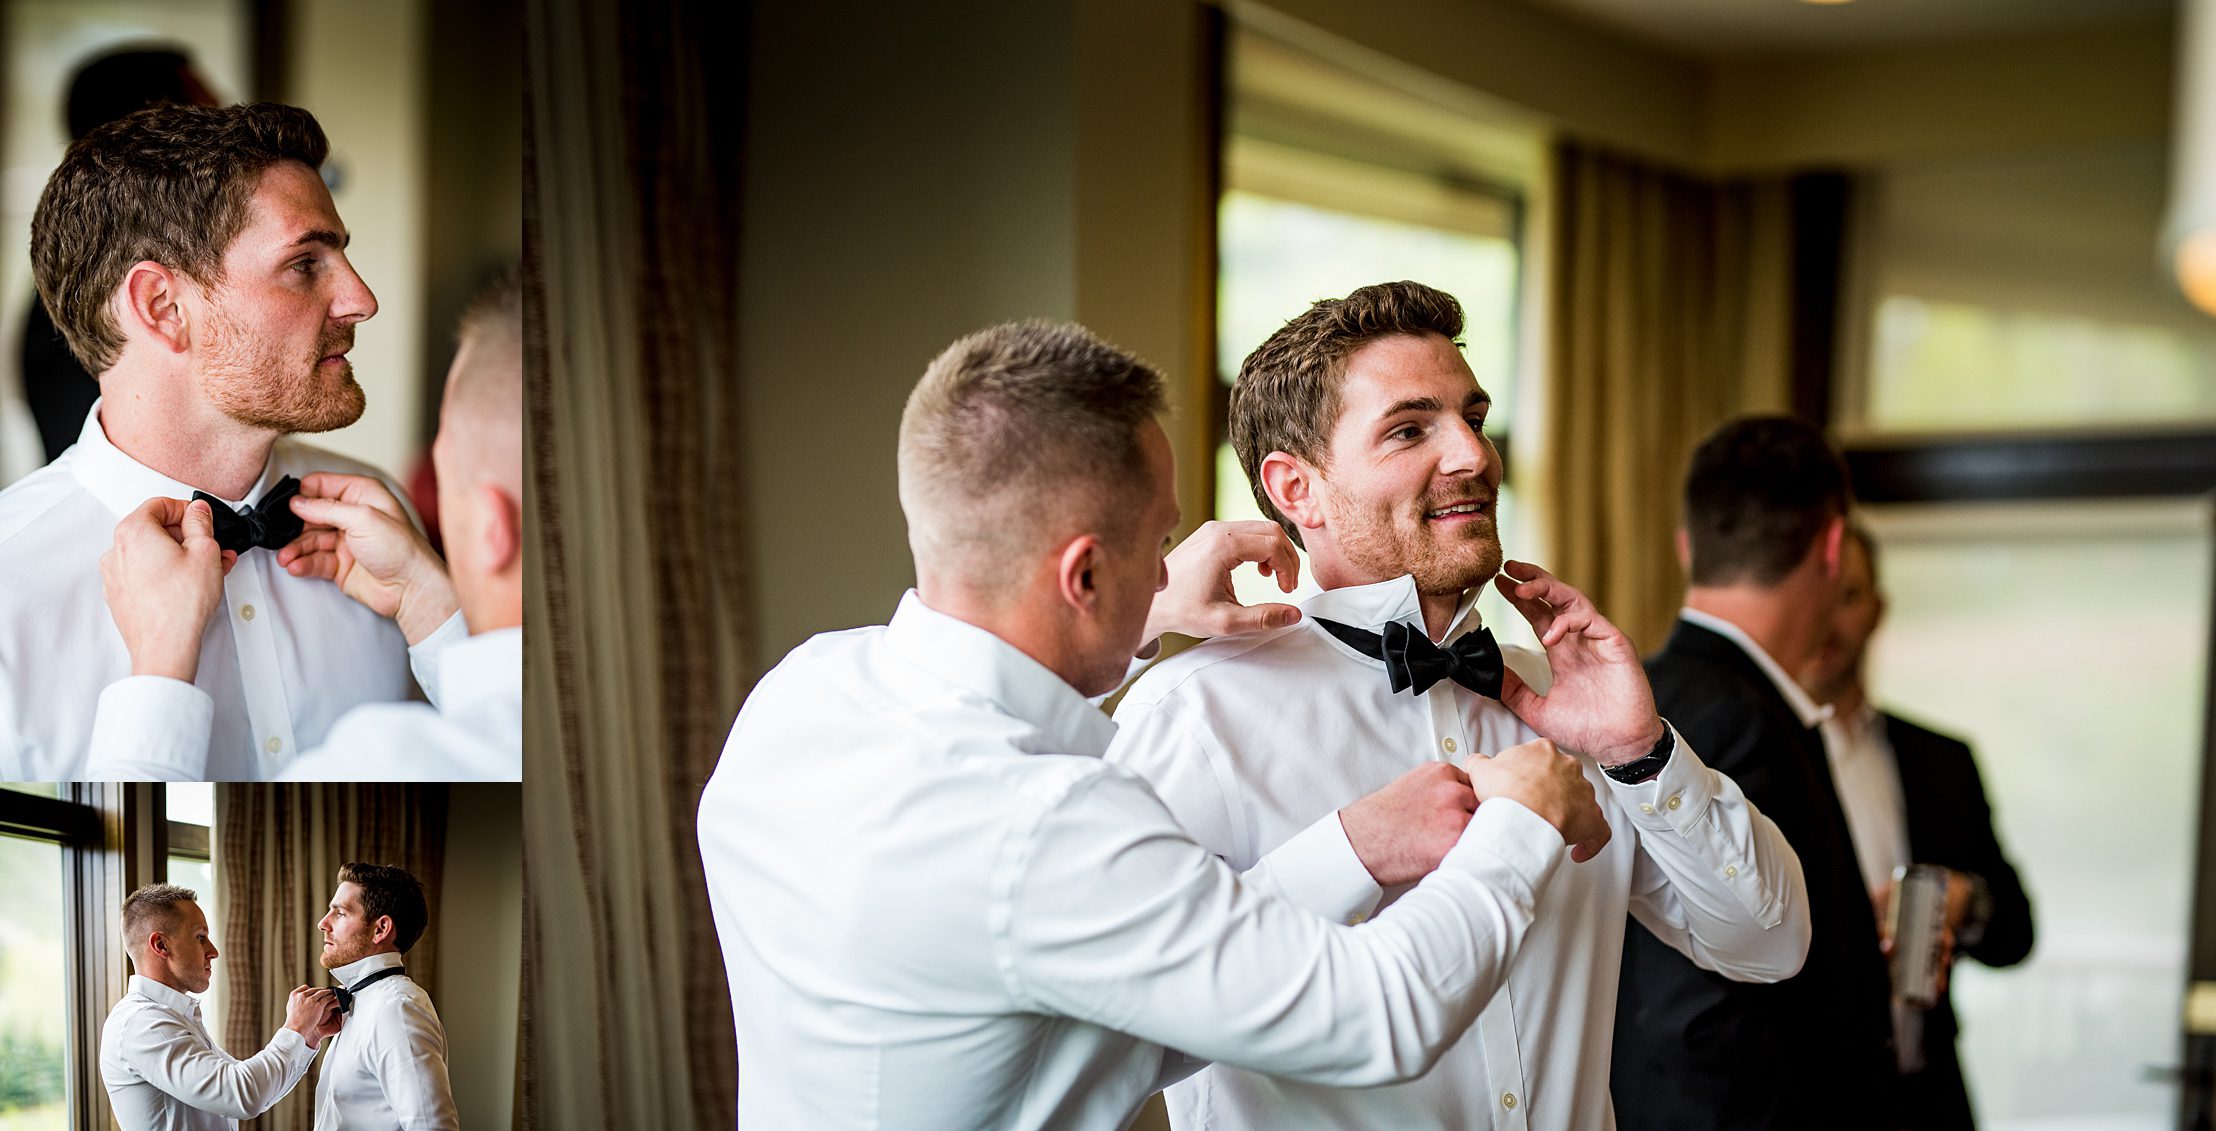 groom getting his bow tie tied in their hotel room